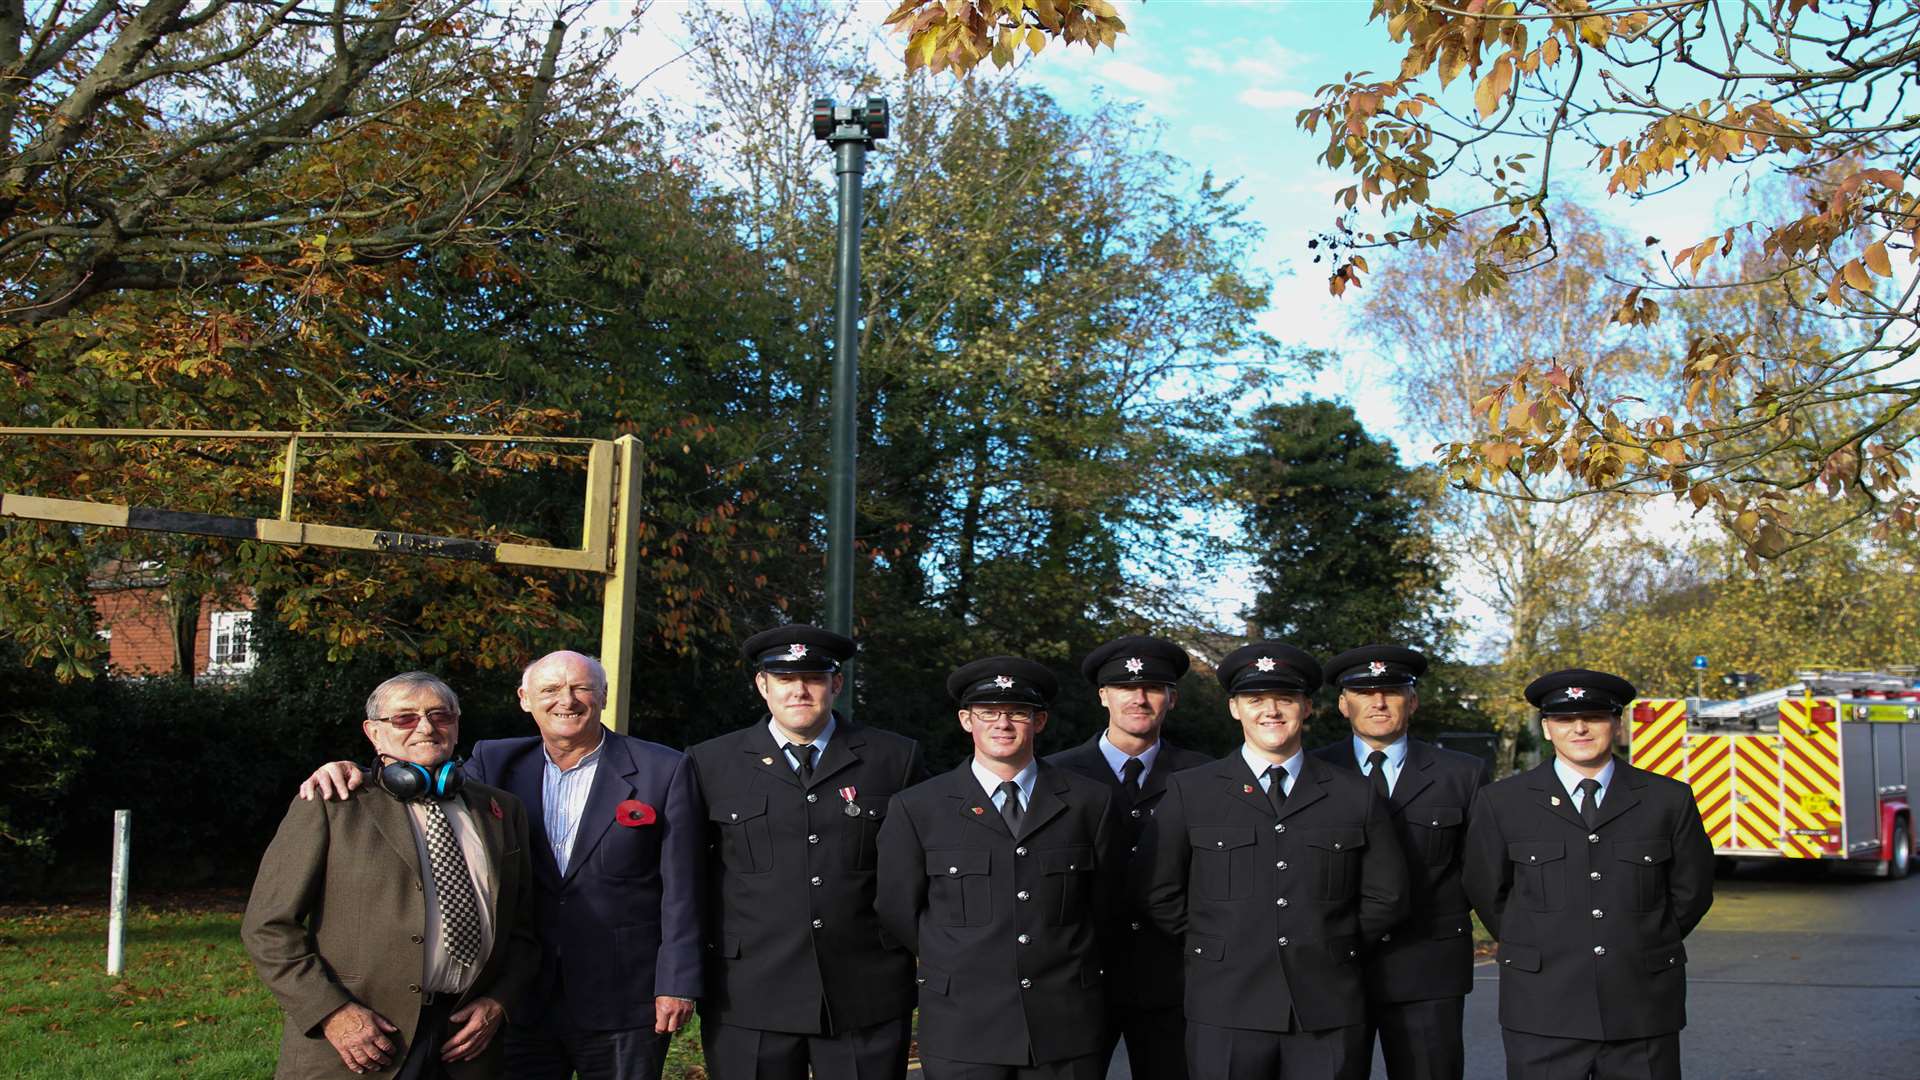 Colin Whittle who found and restored the siren; David McFarland chairman of the Marden History Group, and Marden's Firefighters who erected the new siren in the High Street.